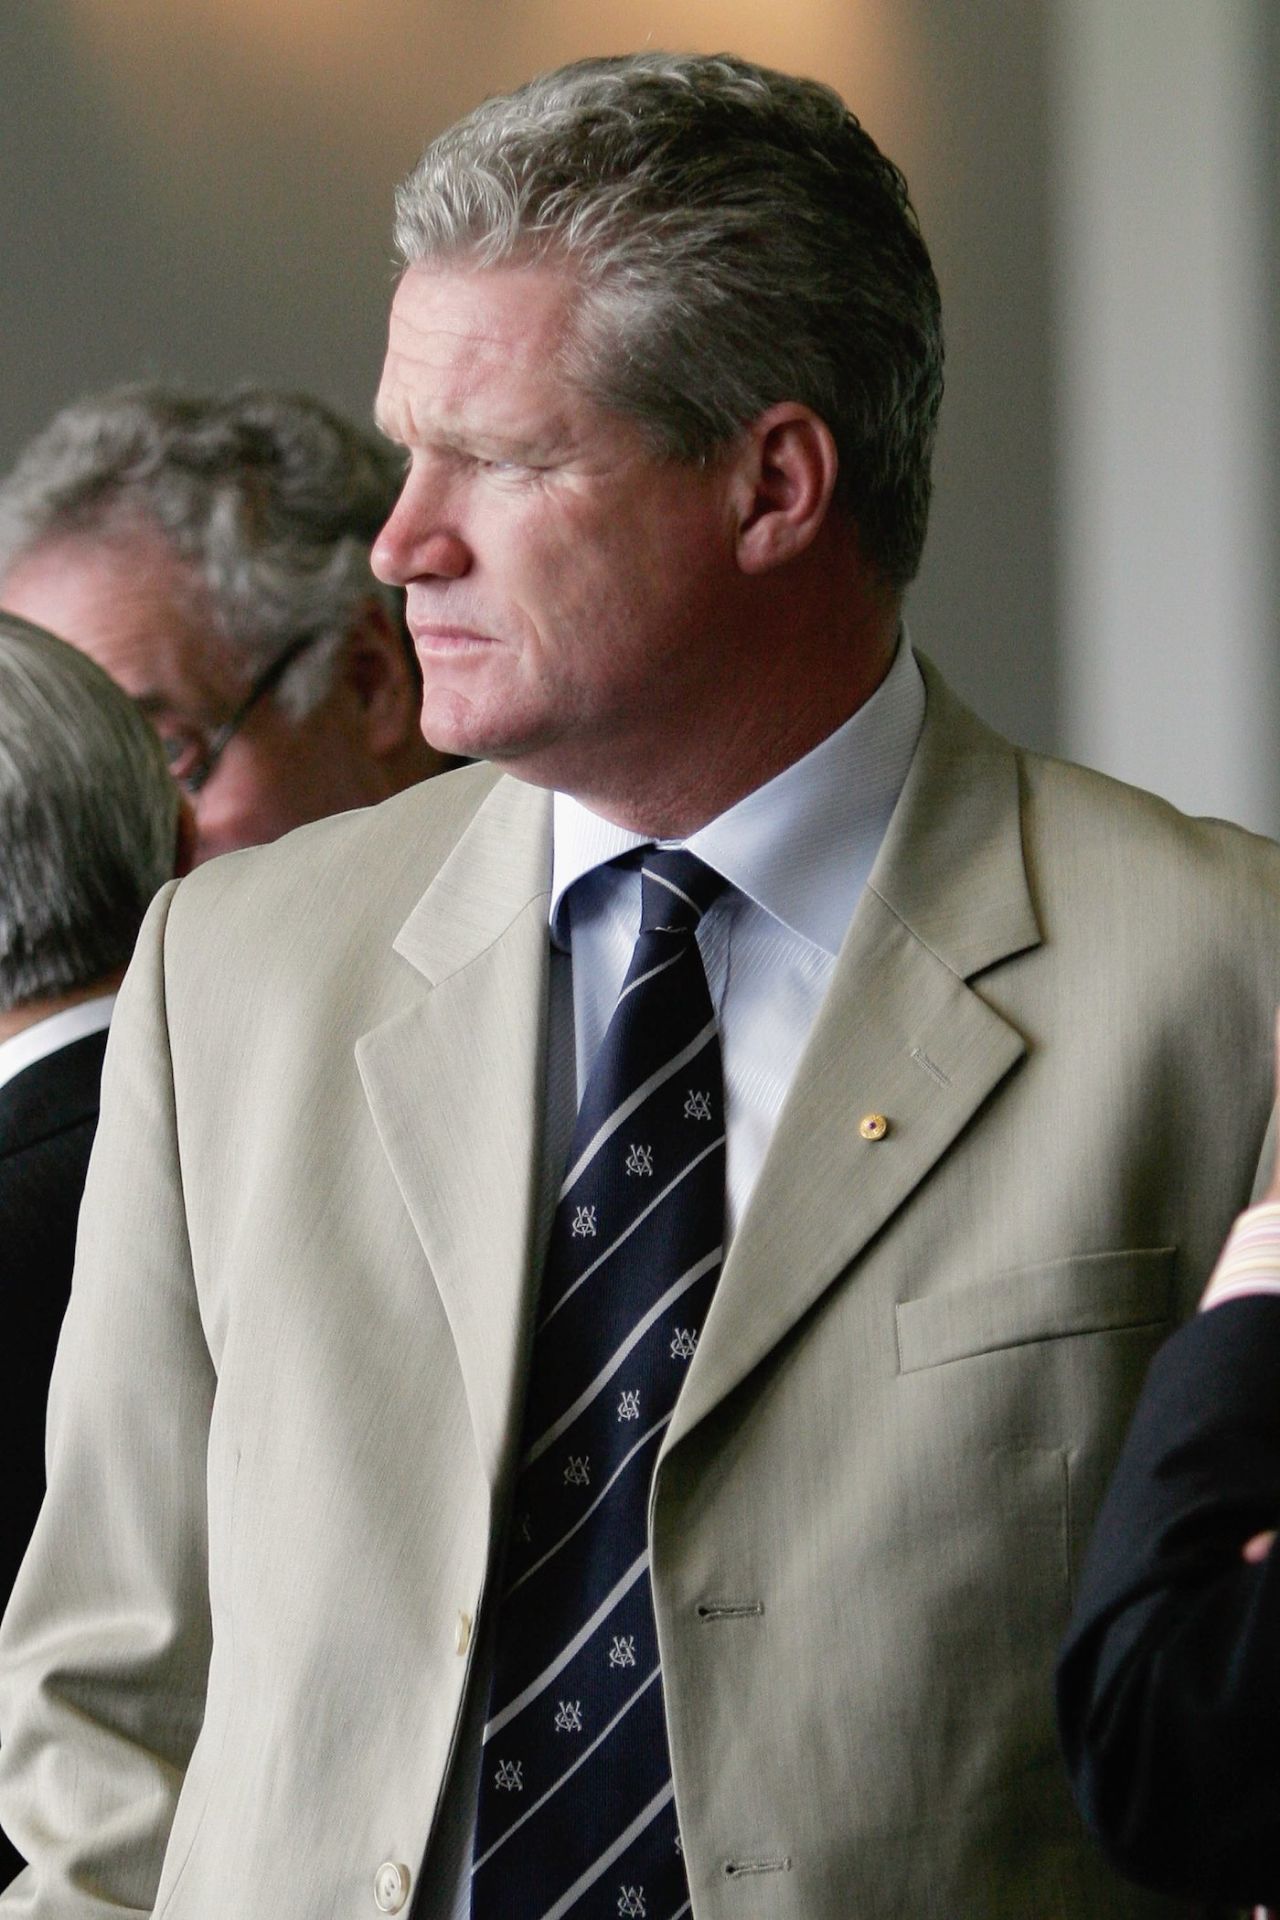 Dean Jones watches the action on a historic day on which Shane Warne became the first man to take 700 Test wickets, Australia v England, 4th Test, Melbourne, December 26, 2006